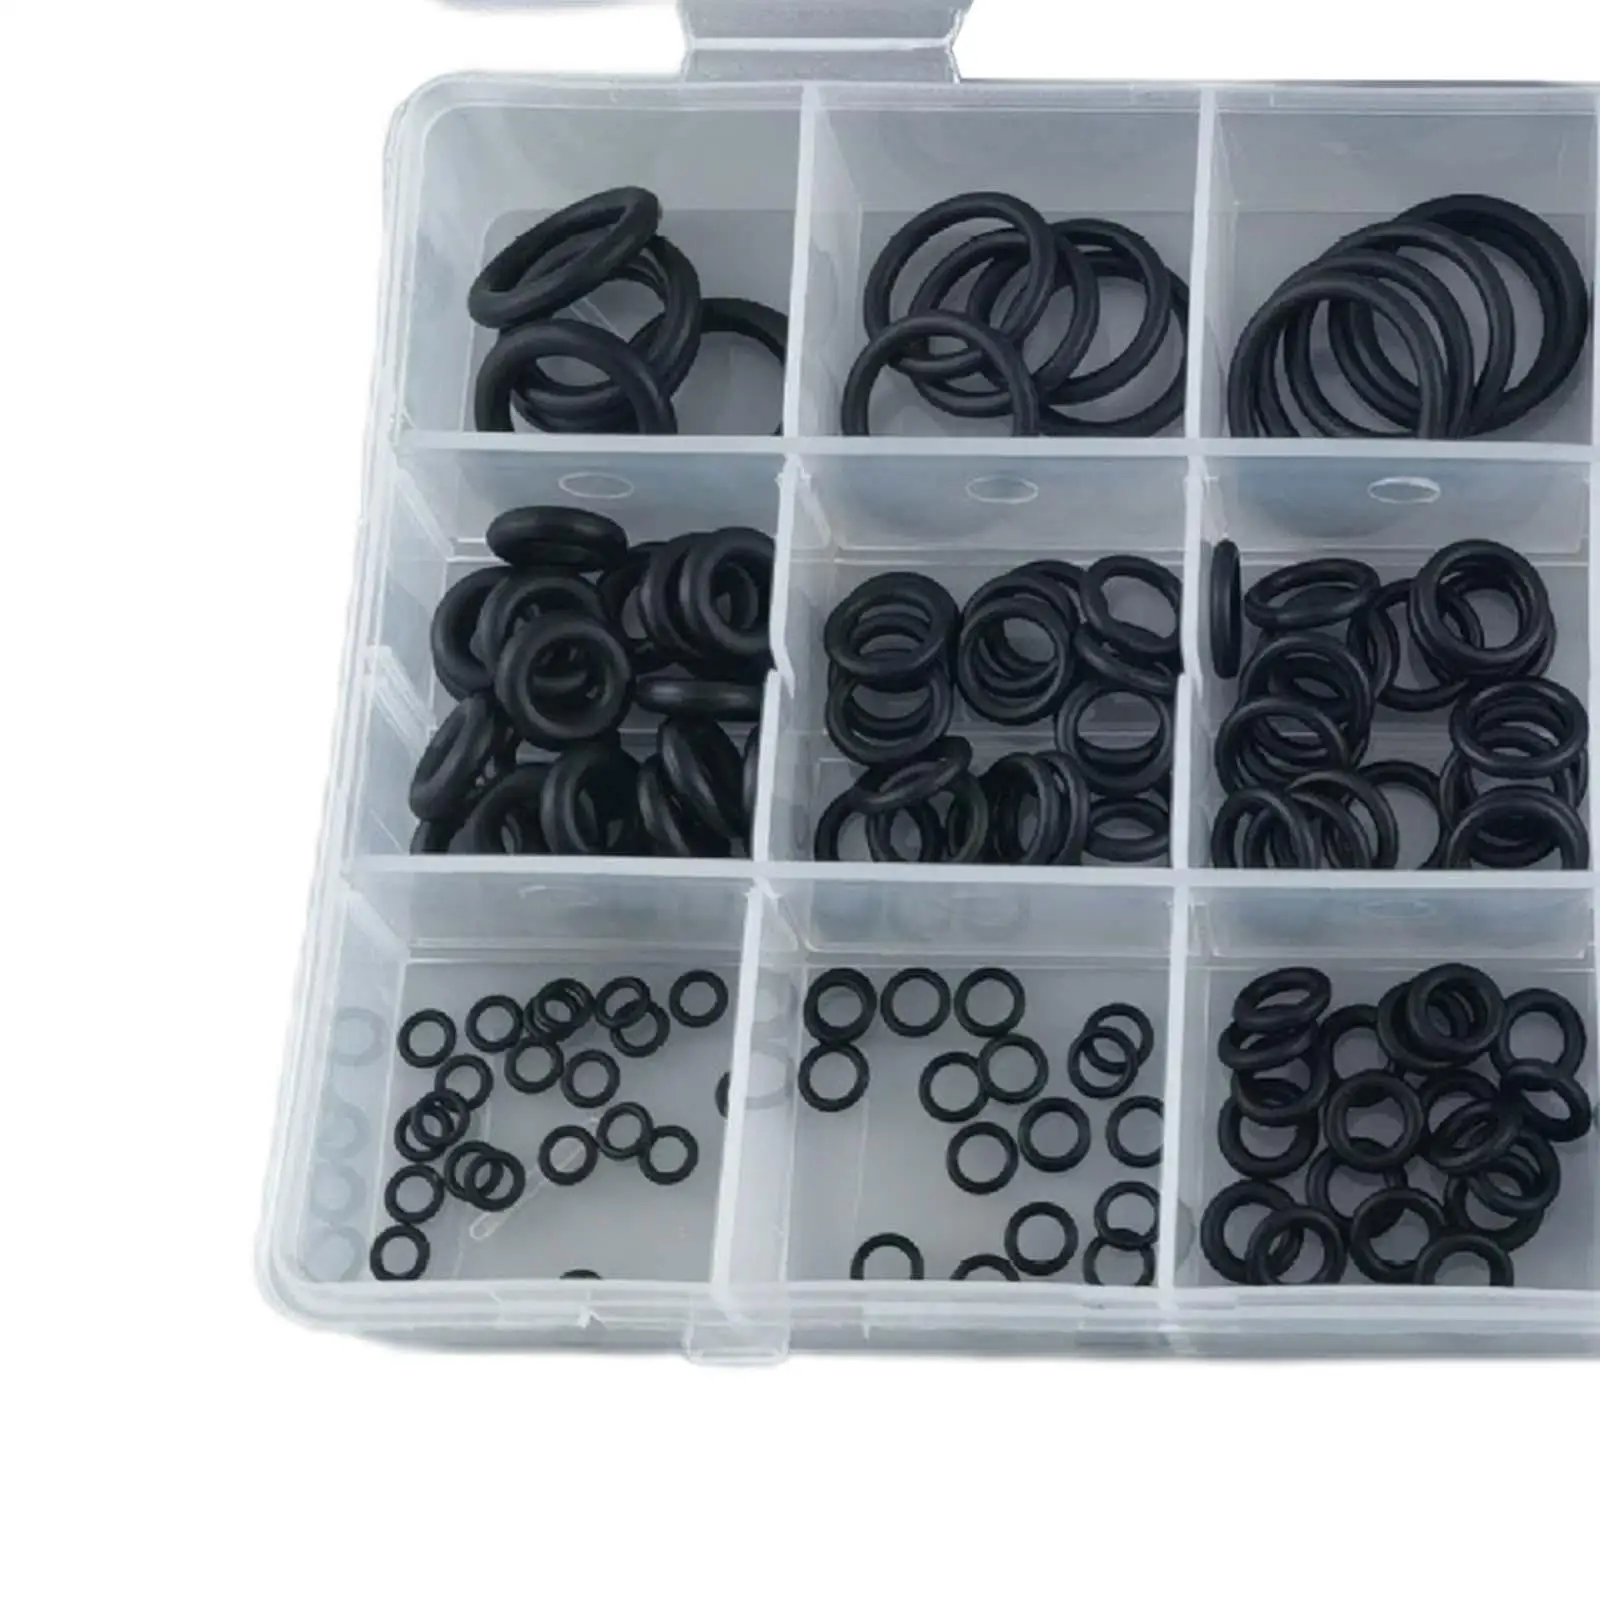 225Pcs Rubber O Rings Set Washer Gasket Set Seal Rings Set Sealing Washer Assortment for Roller Vehicle Car Auto Window Pump